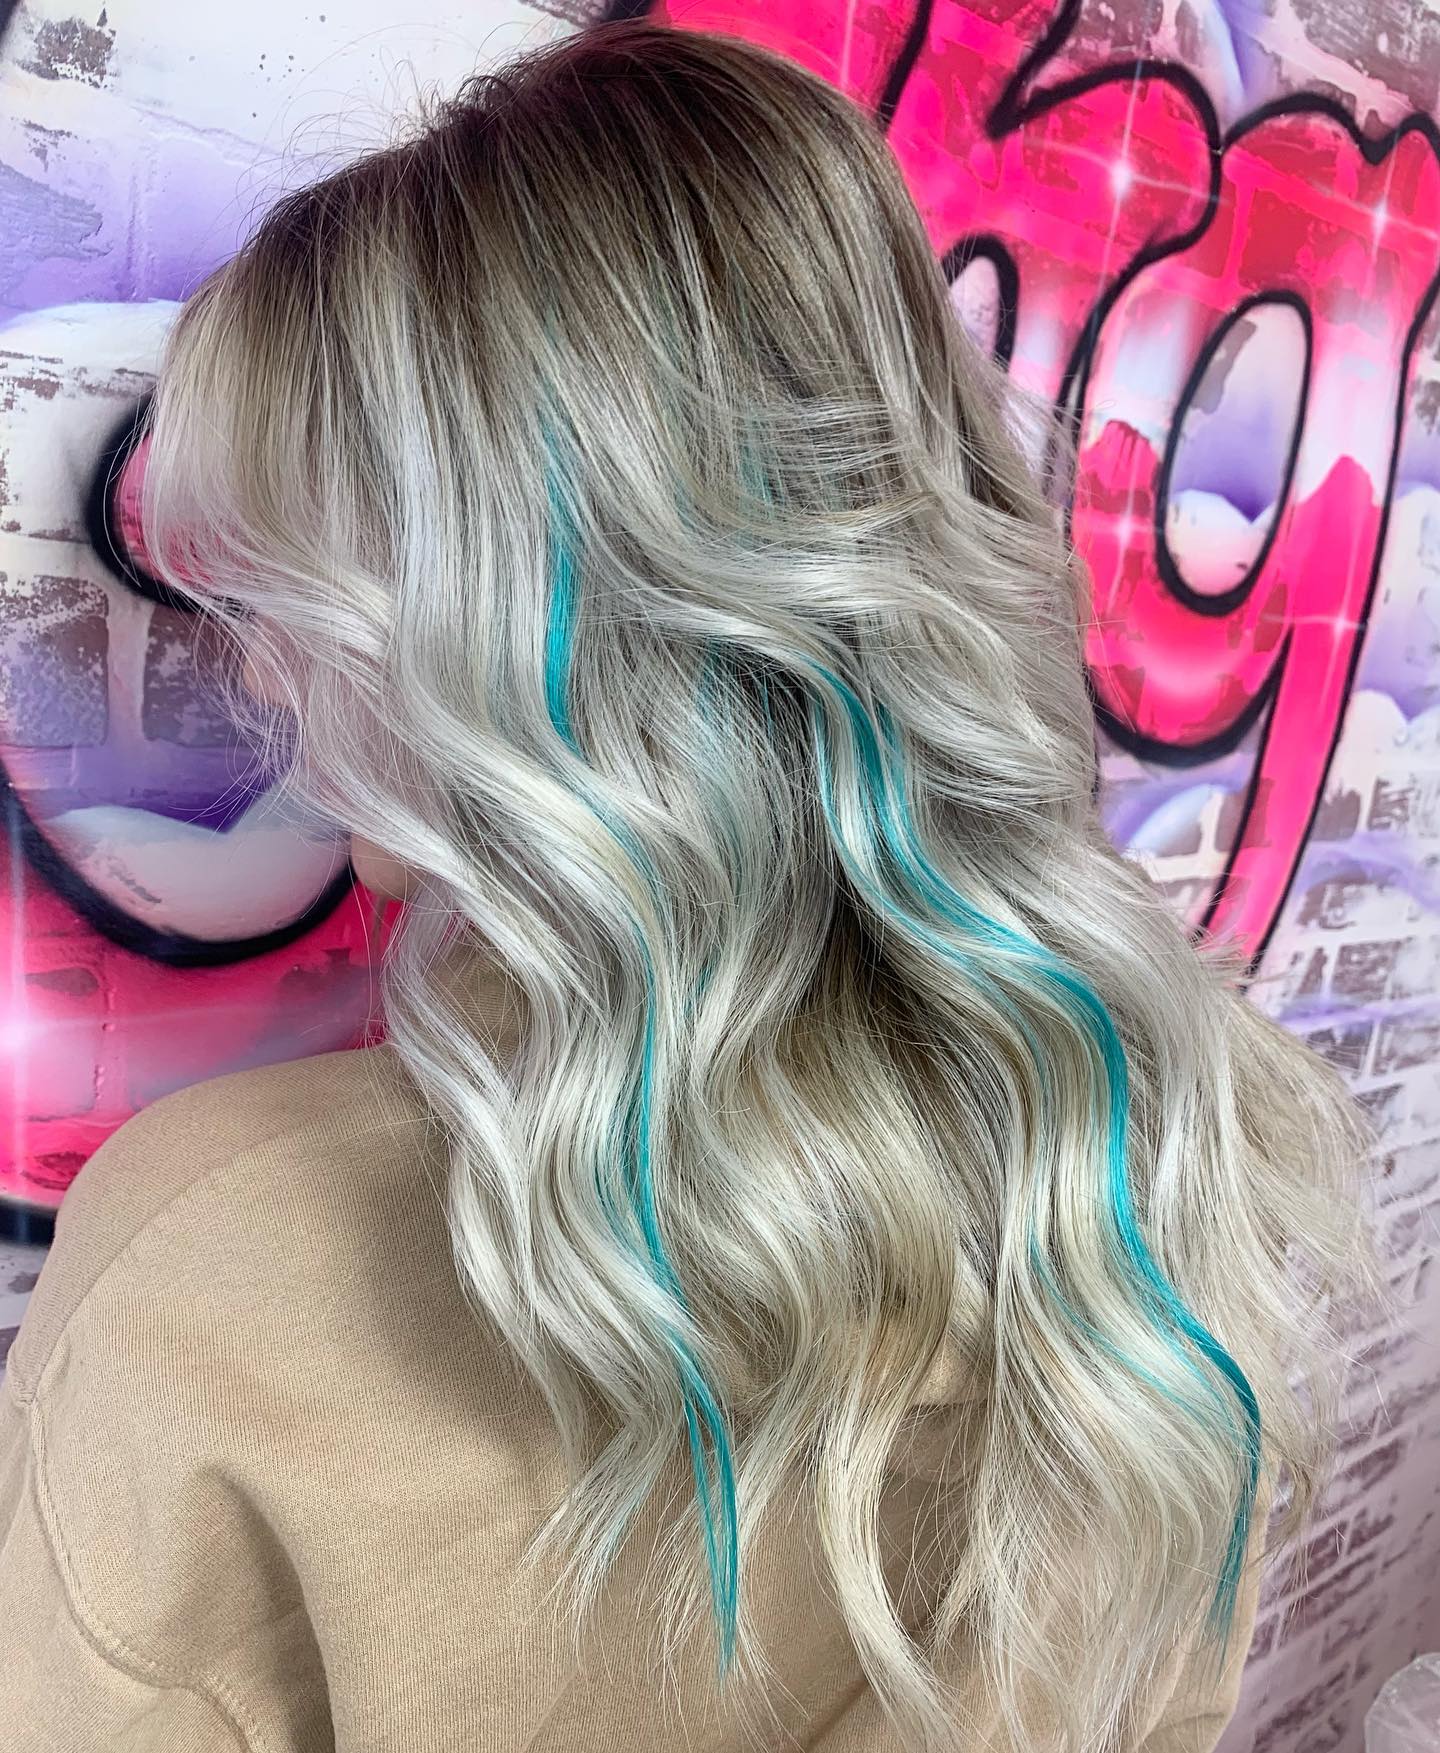 Turquoise Highlights on Long Wavy Blonde Hair